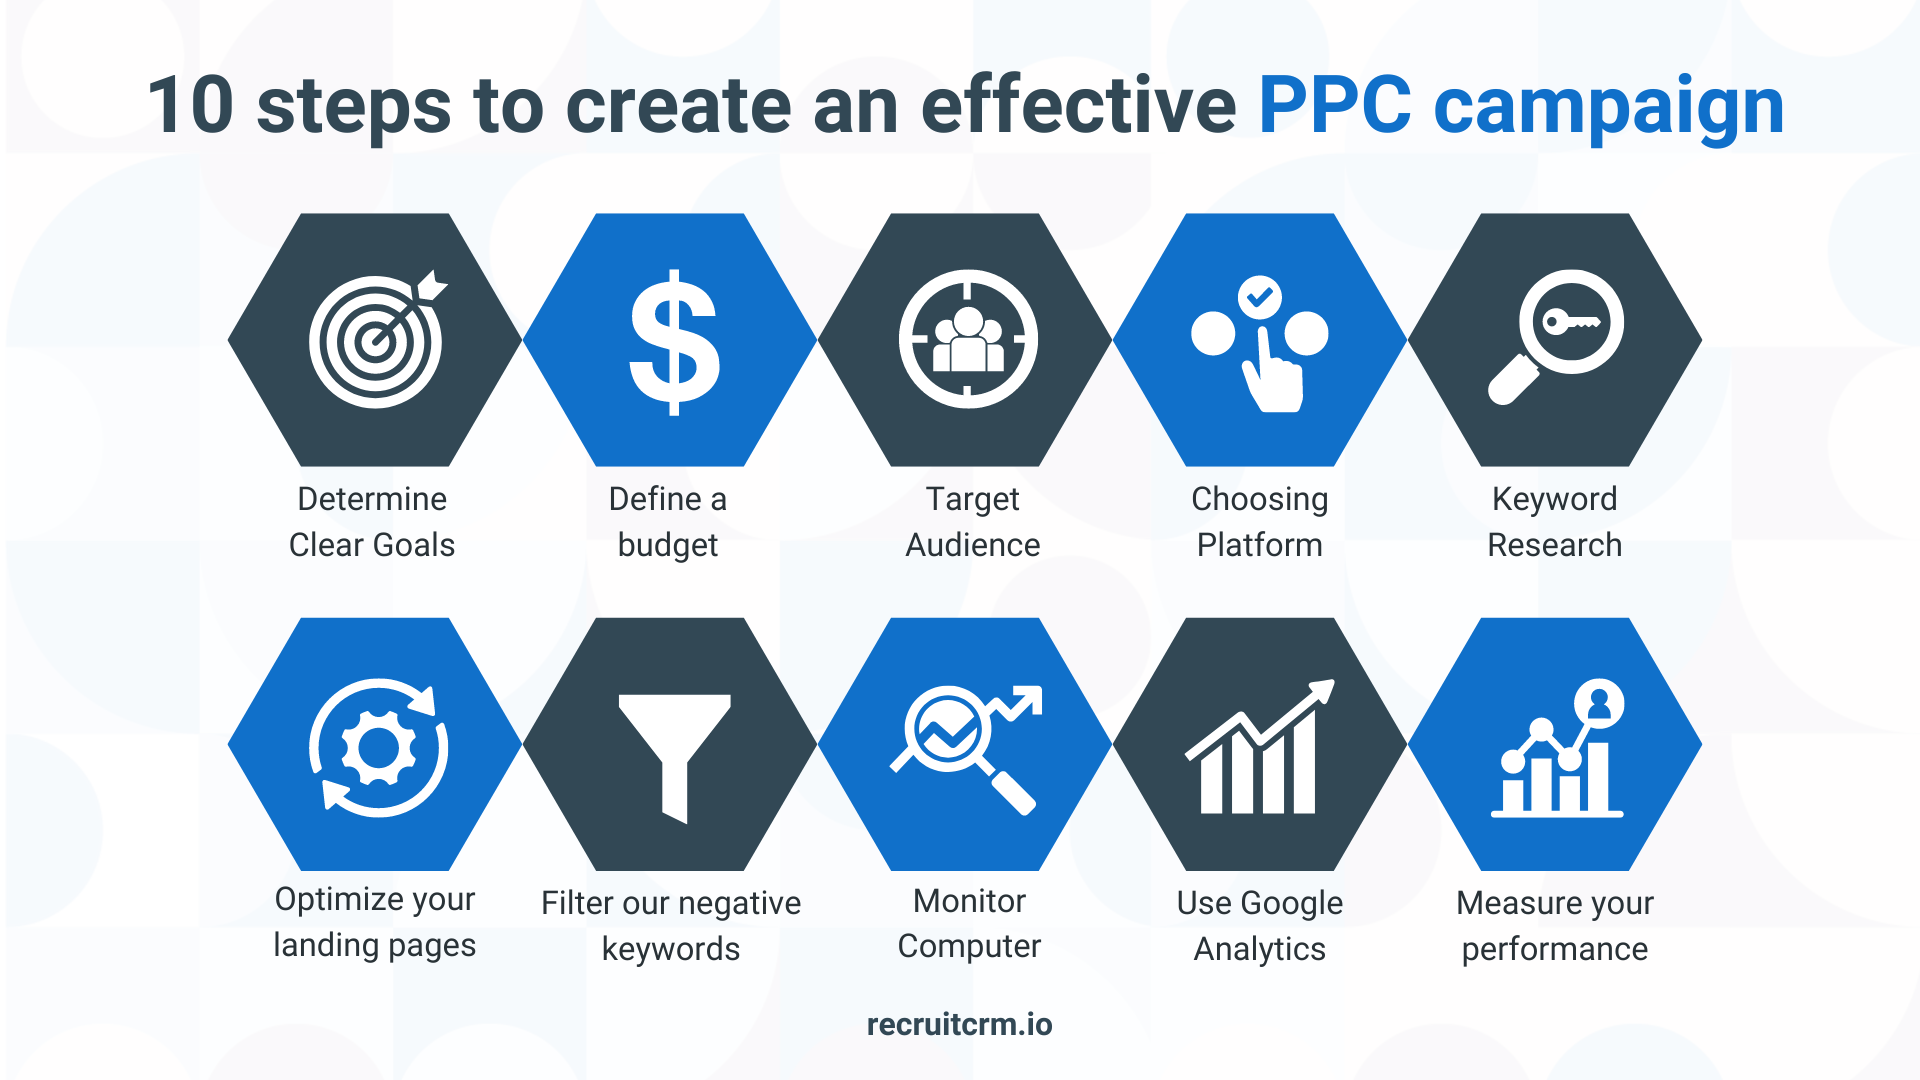 10 steps to create an effective PPC campaign